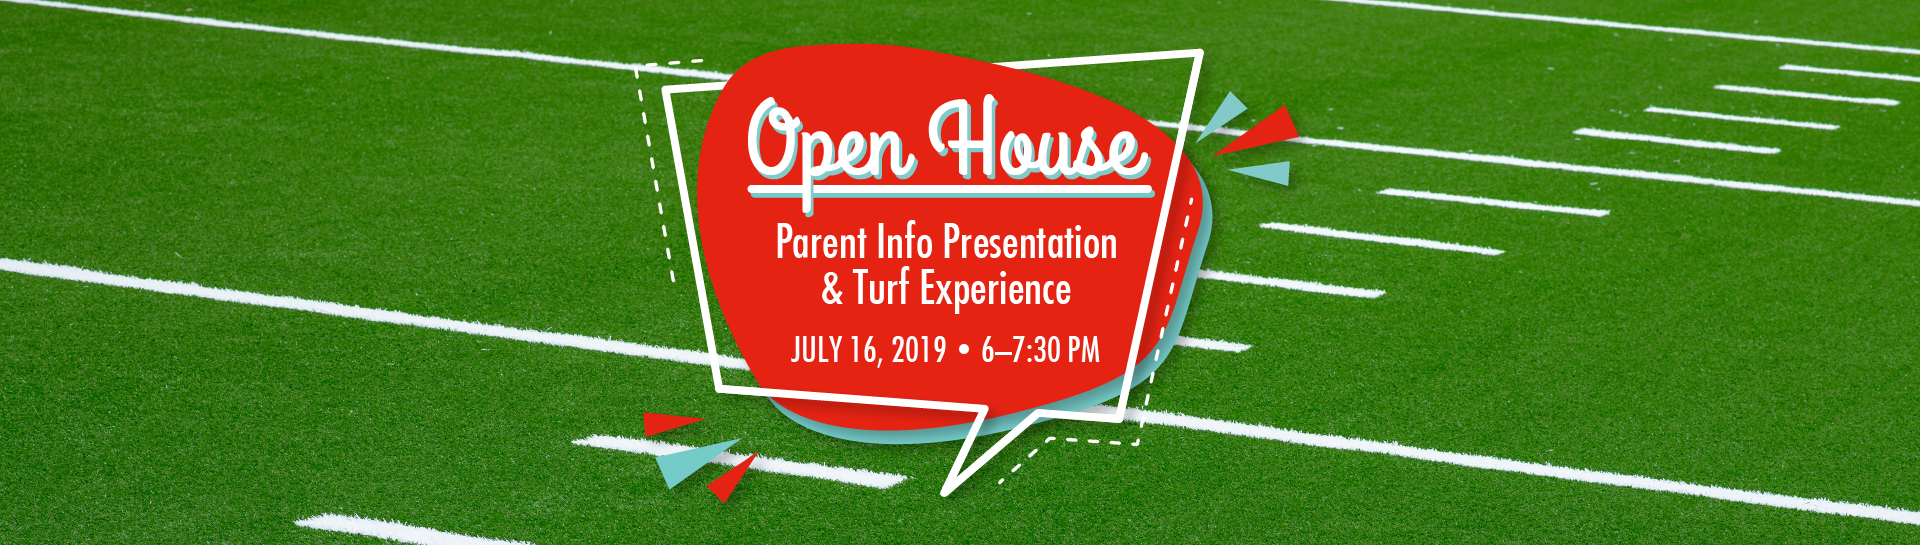 Open House Parent Info Presentation and Turf Experience - July 16